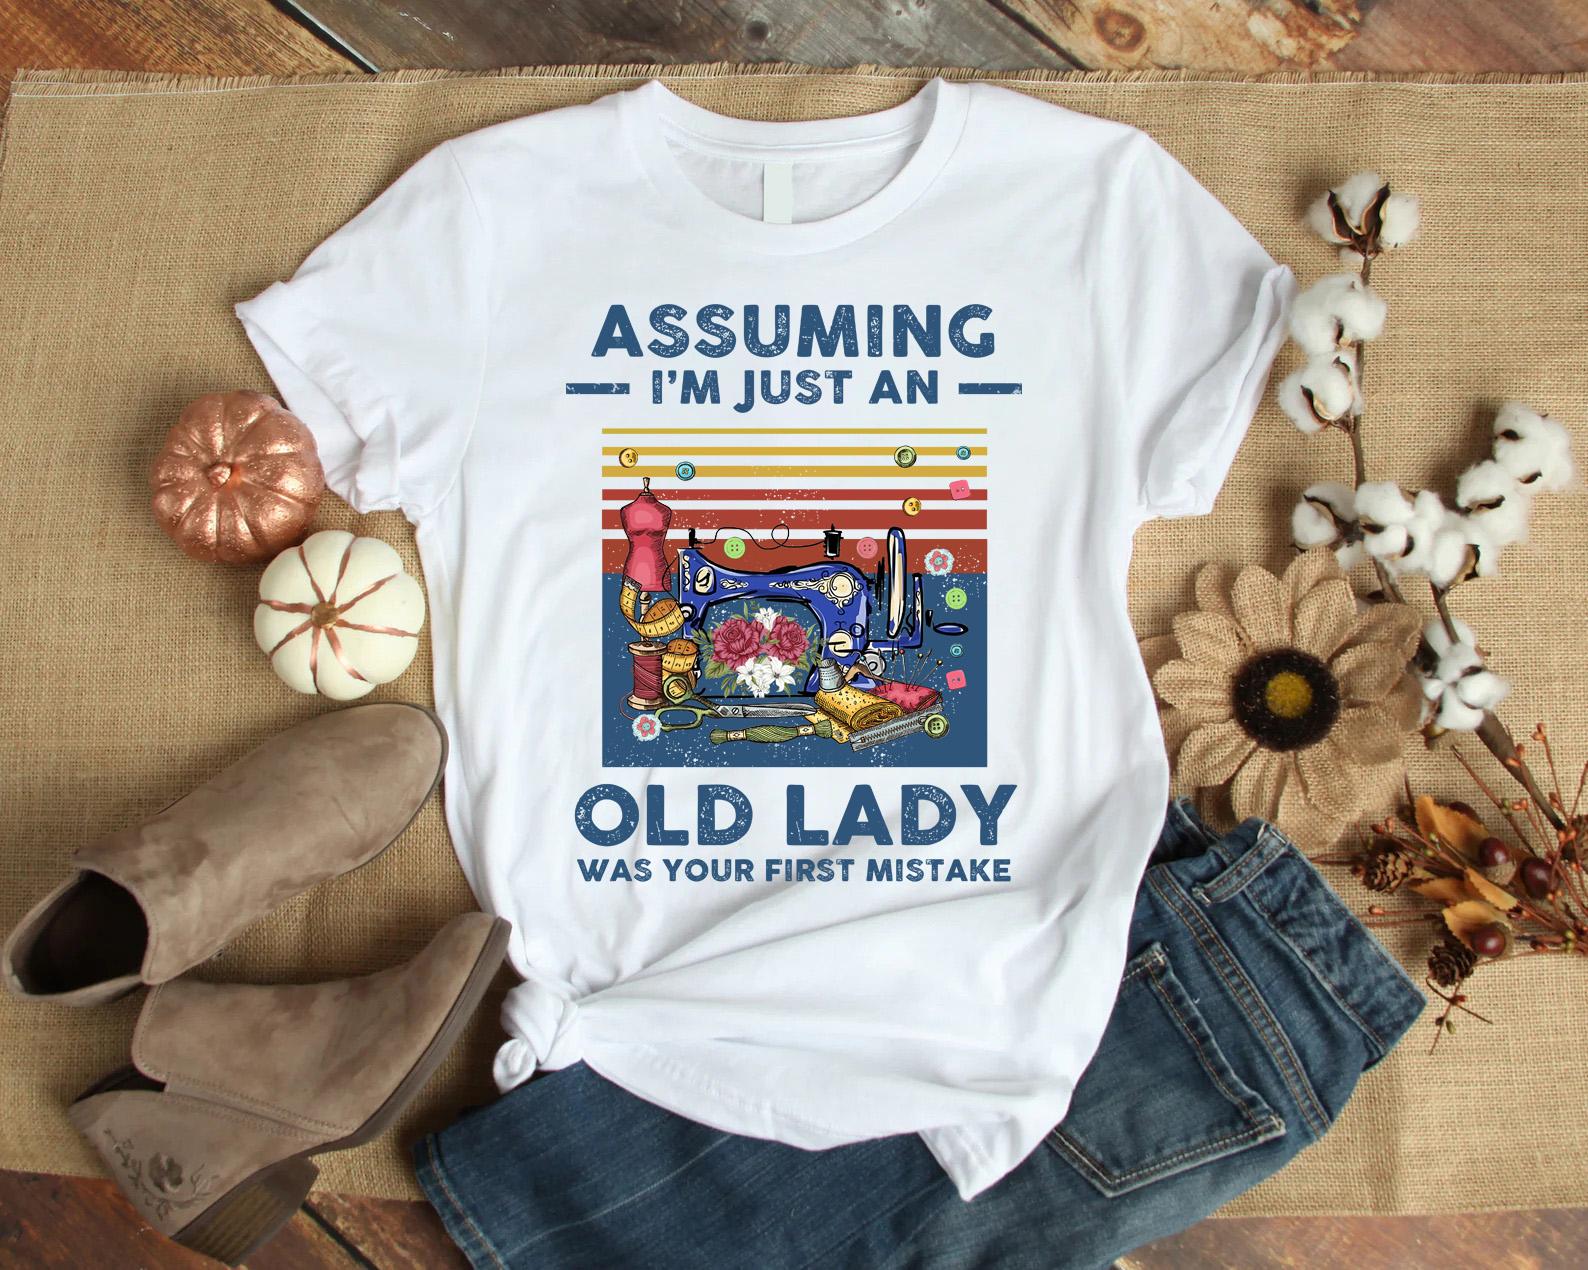 Sew Machine - Assuming i'm just an old lady was your first mistake